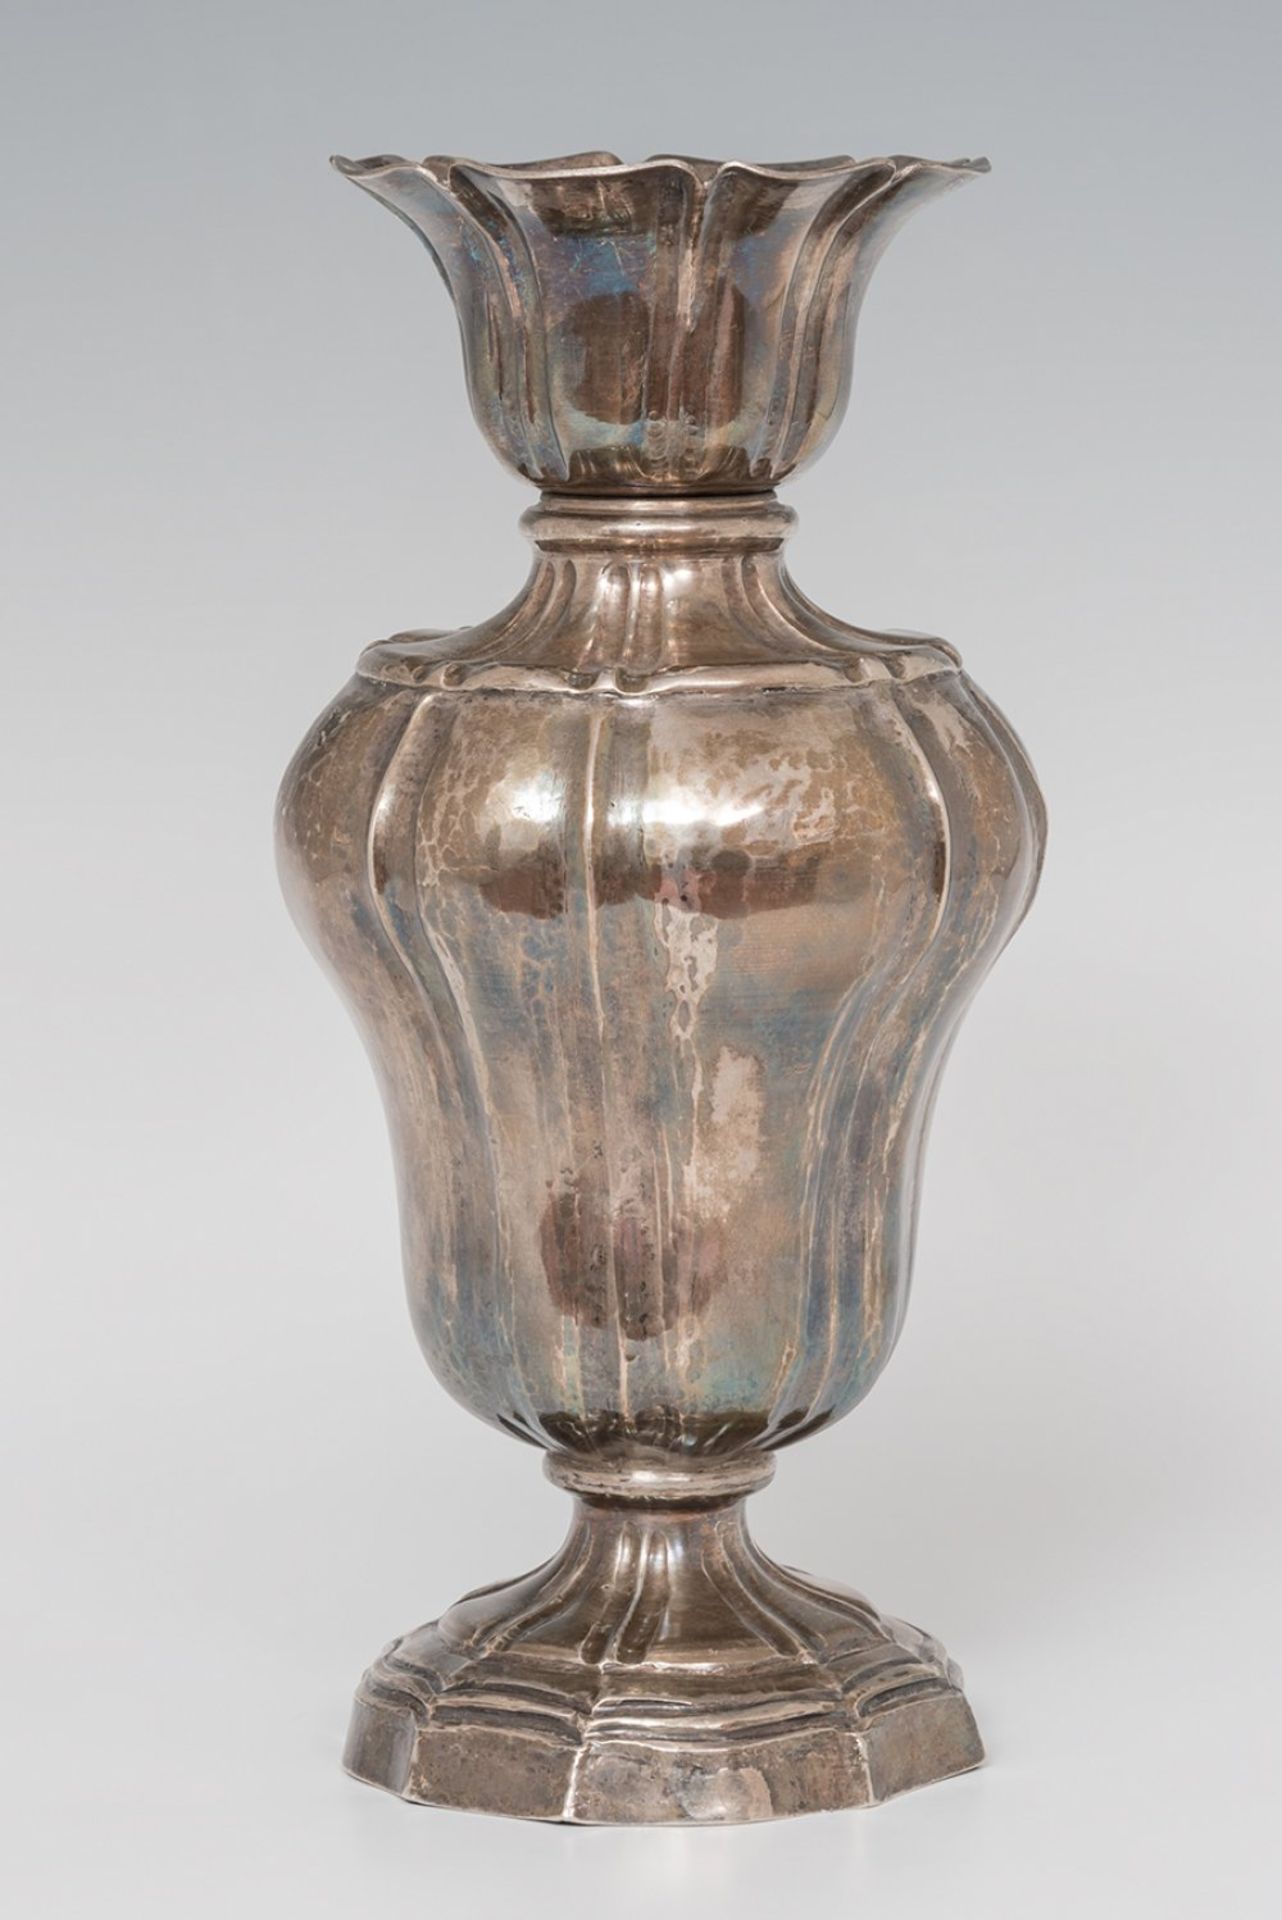 Altar vase in stamped silver. Mexico. 18th centuryWeight: 968.5 g. Measure: 27.5 x 14 cm.Vase - Image 5 of 6